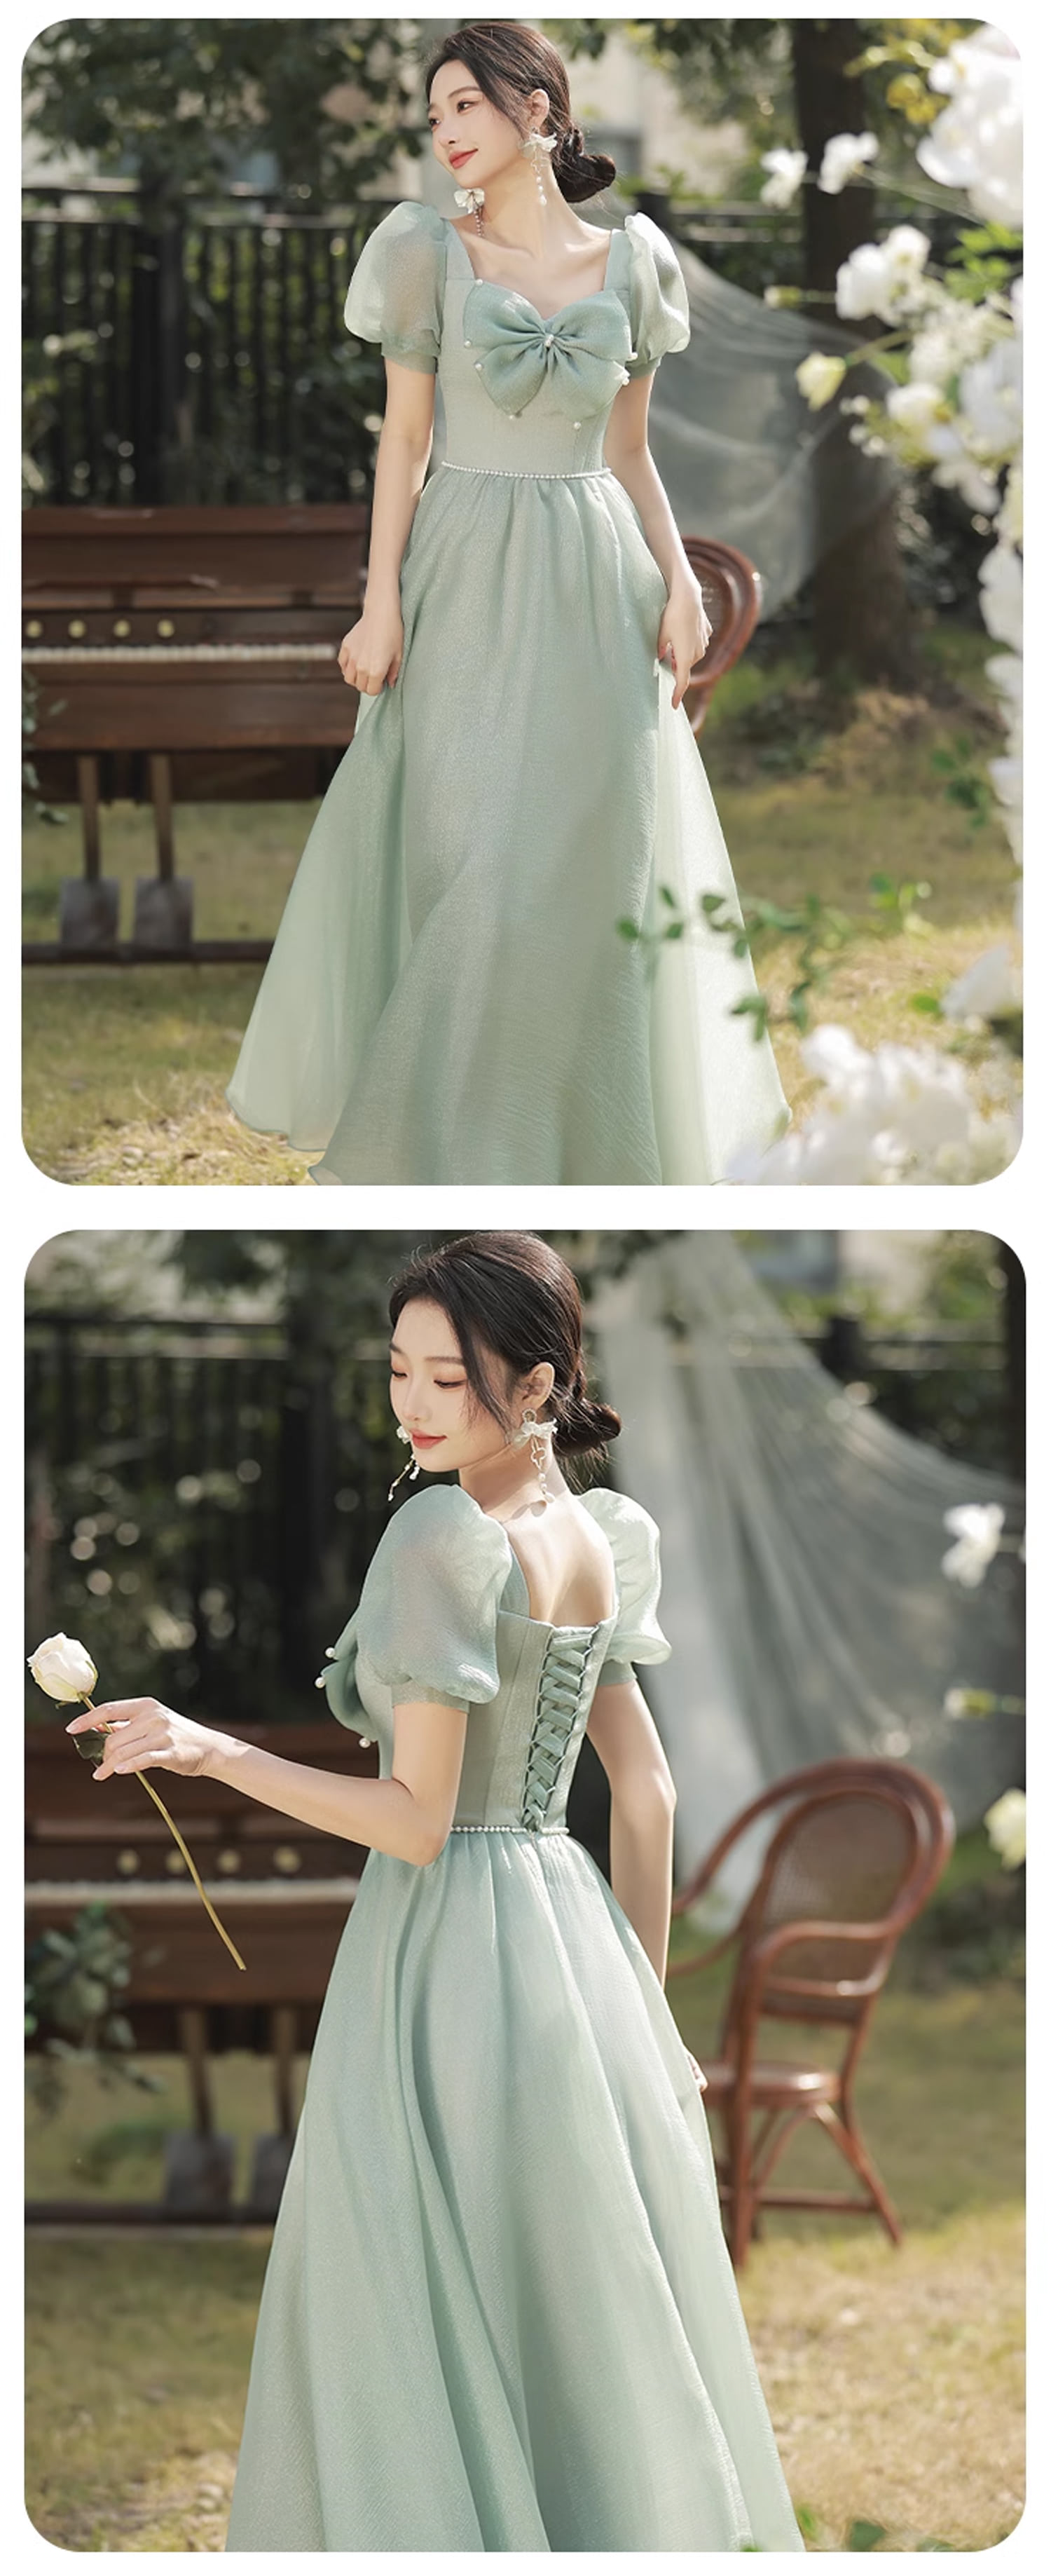 Chic-Green-Bridesmaid-Dress-Boho-Wedding-Guest-Bridal-Party-Gown17